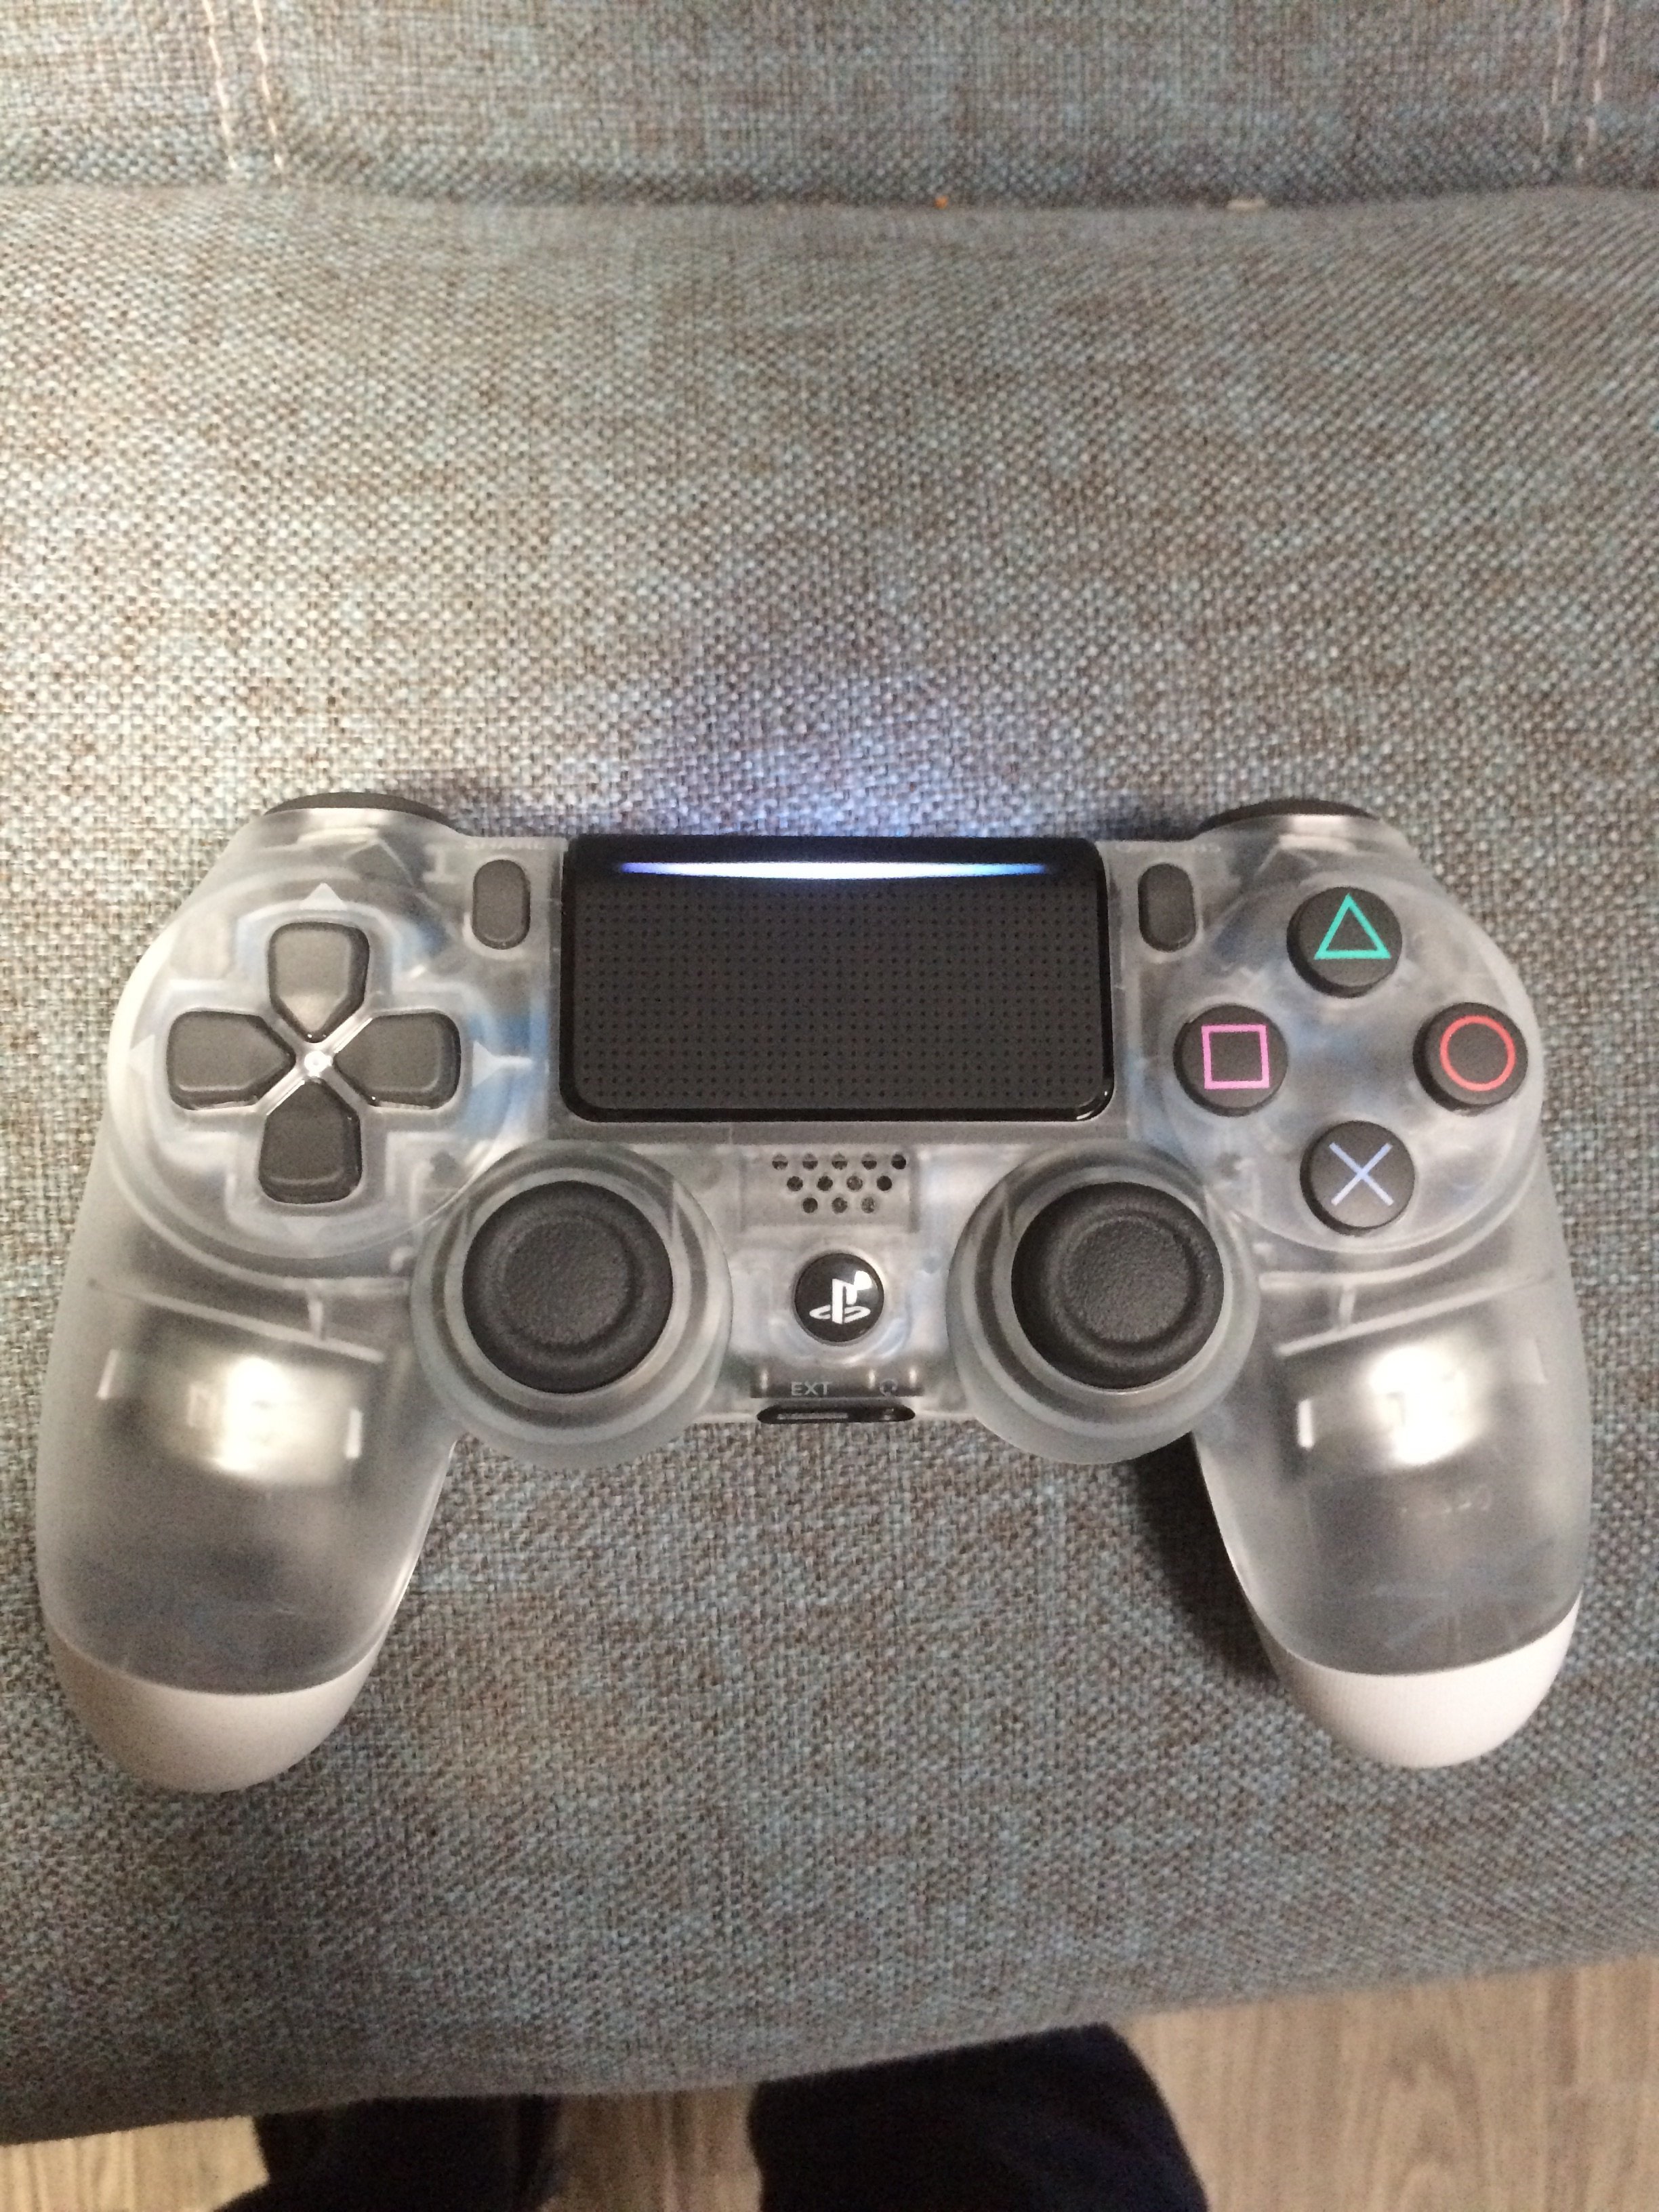 Is my new ds4 fake? | GBAtemp.net - The Independent Video Game Community